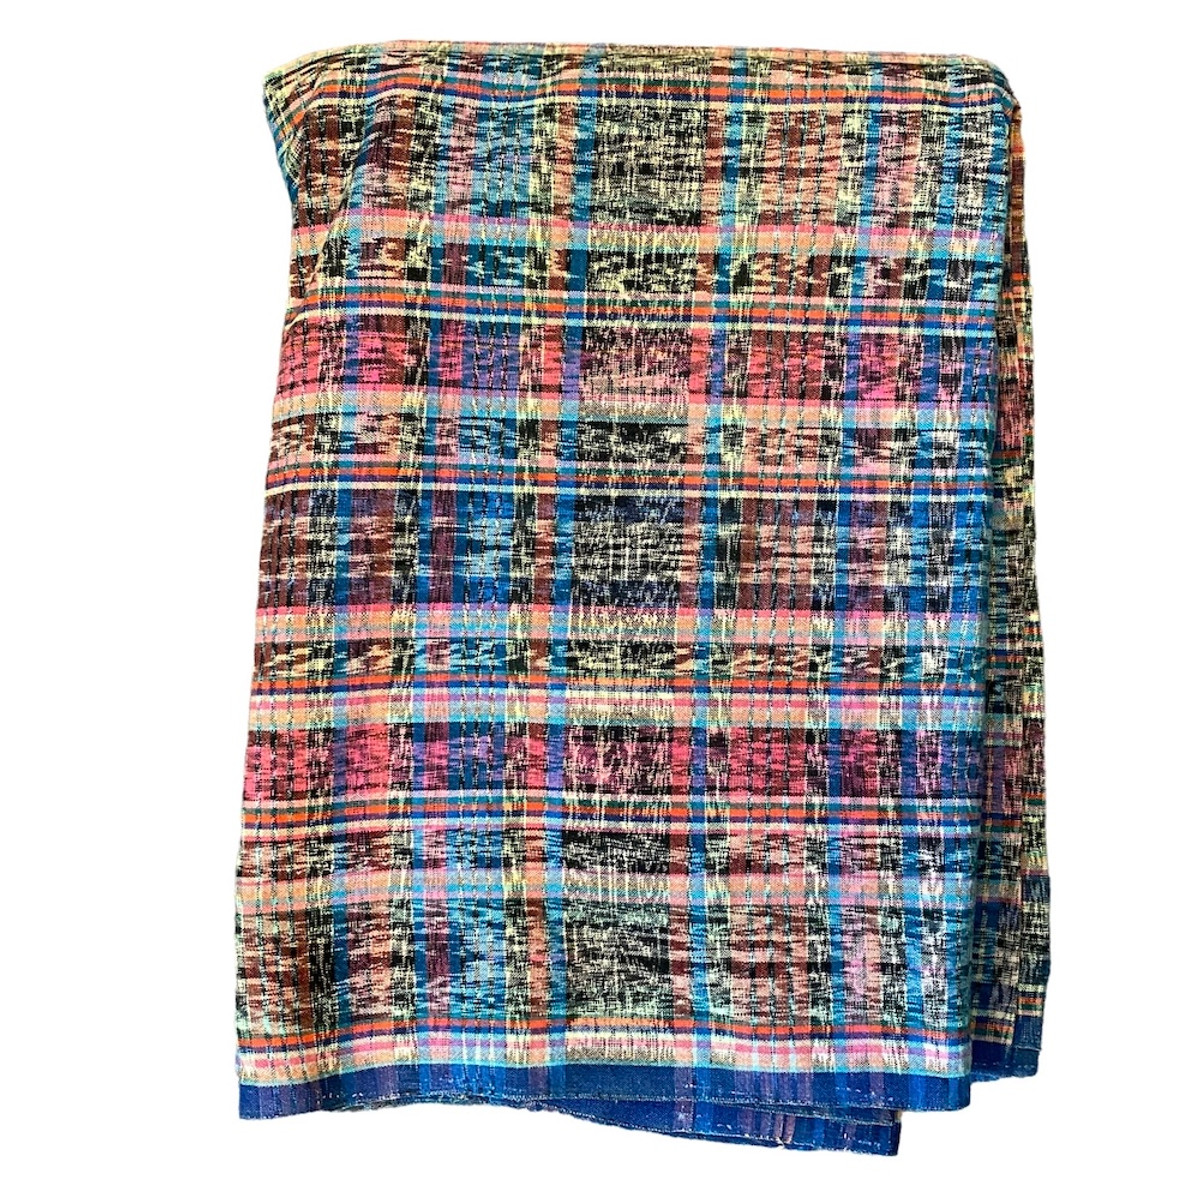 Handwoven Repurposed Ikat Cotton Guatemala Colors: mostly blues and pinks with some orange, white and black